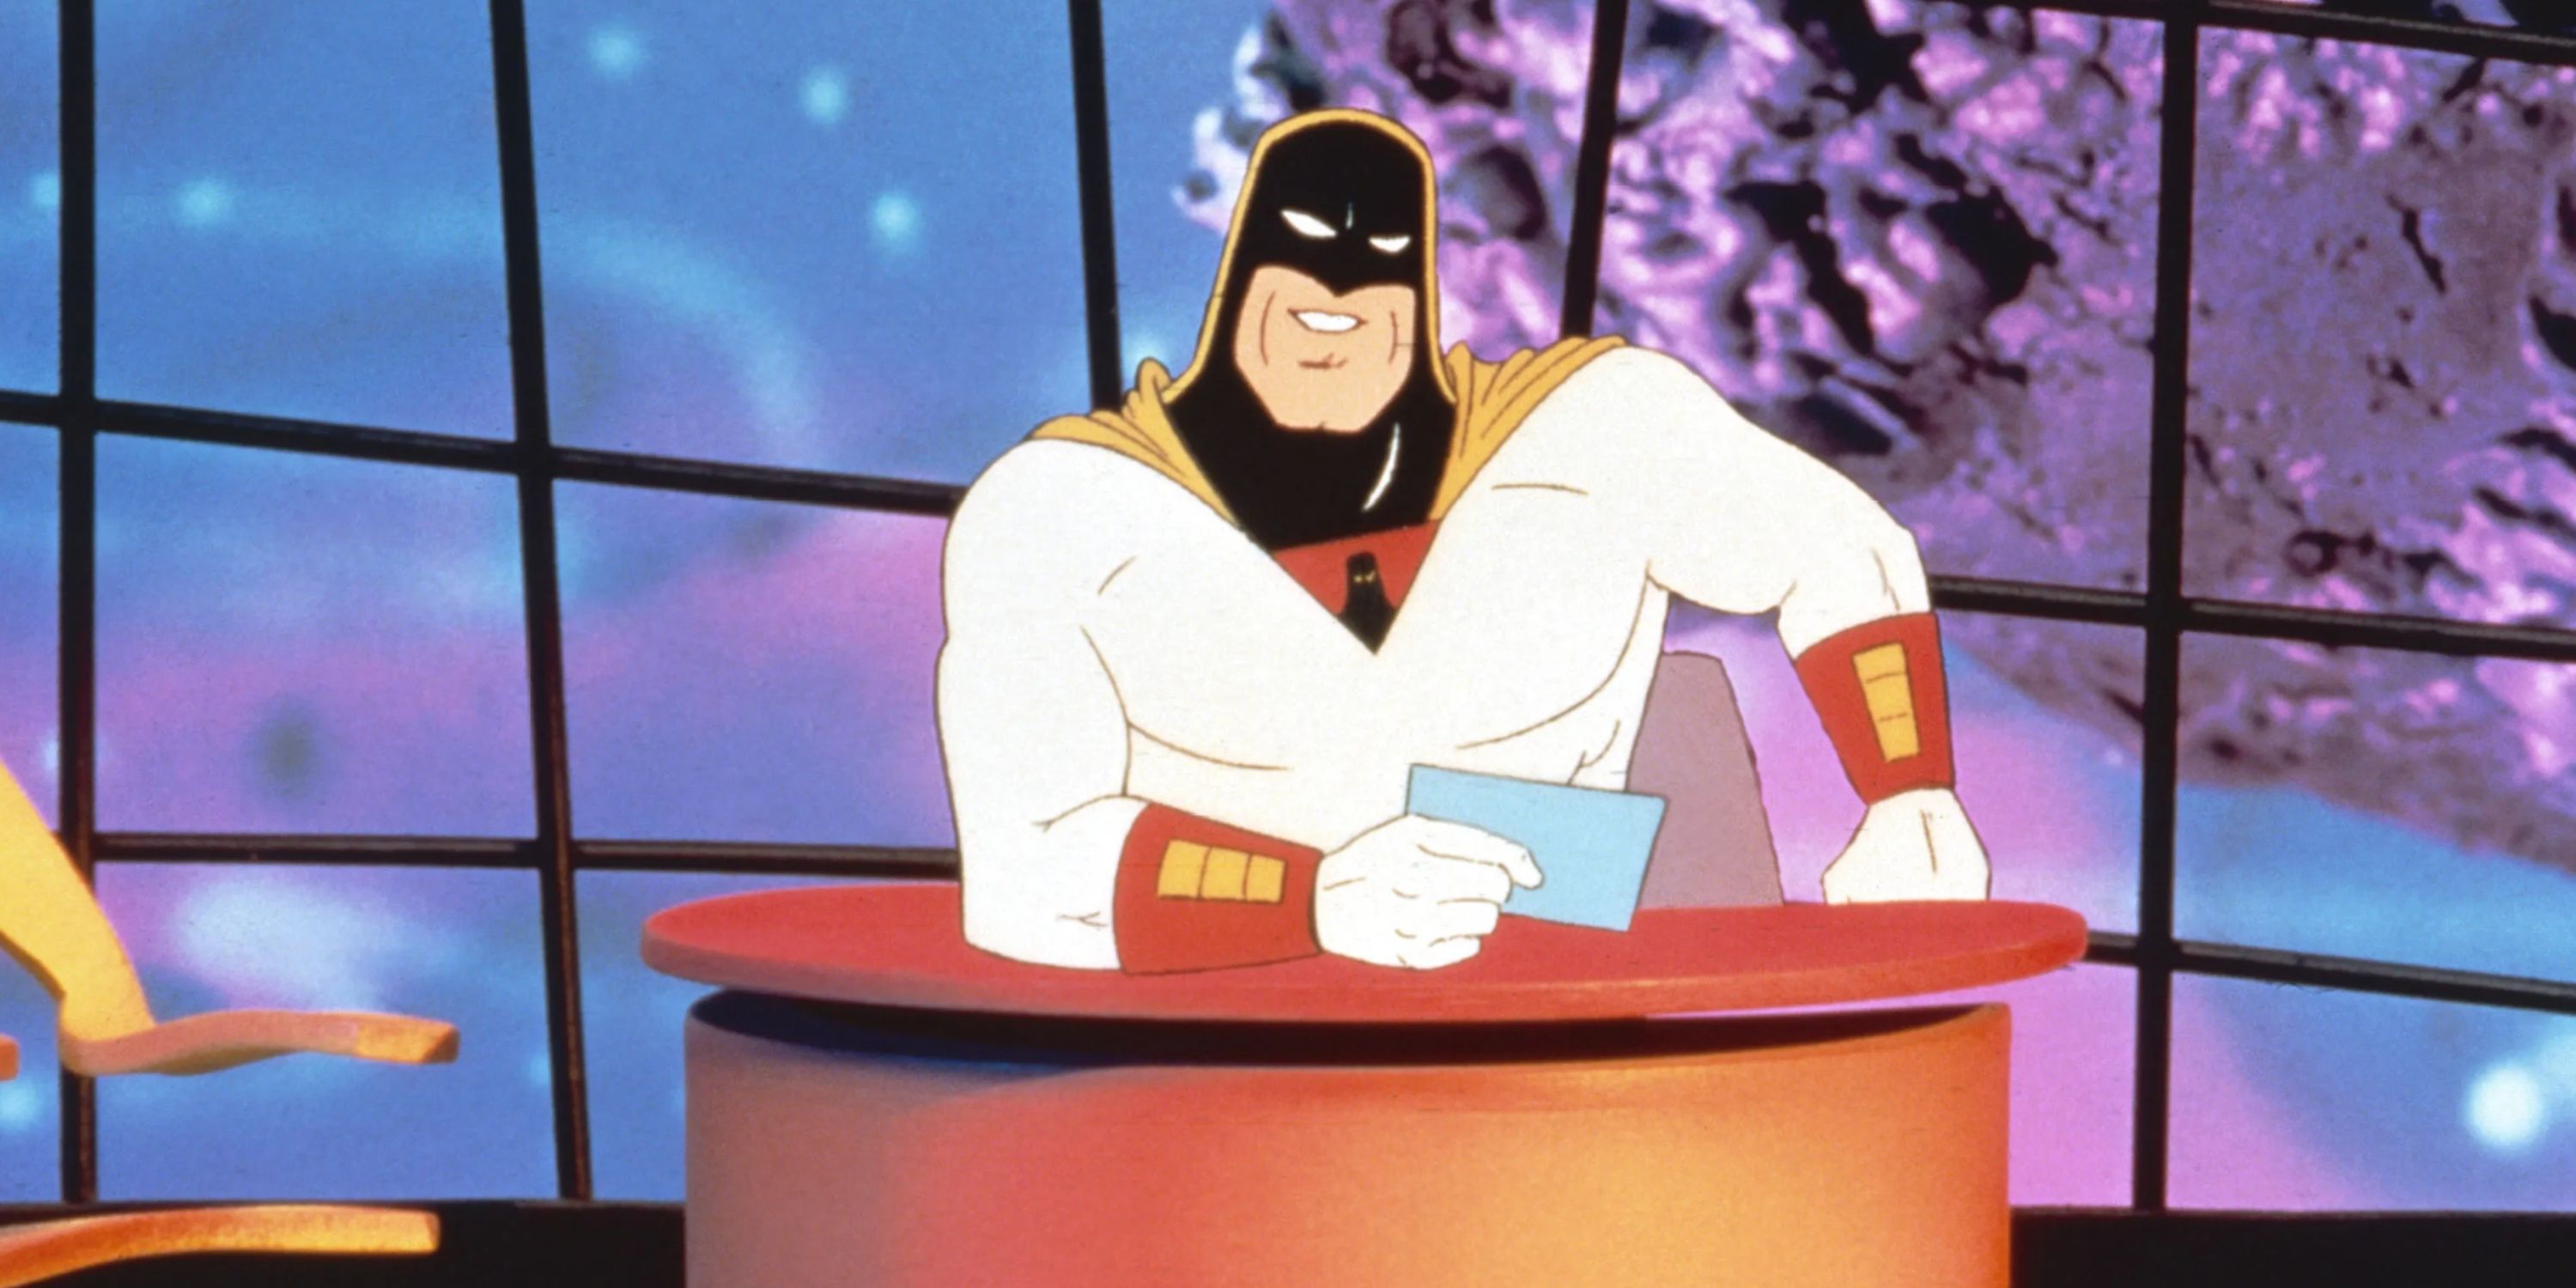 Space Ghost speaks to the audience during an episode of Space Ghost: Coast to Coast